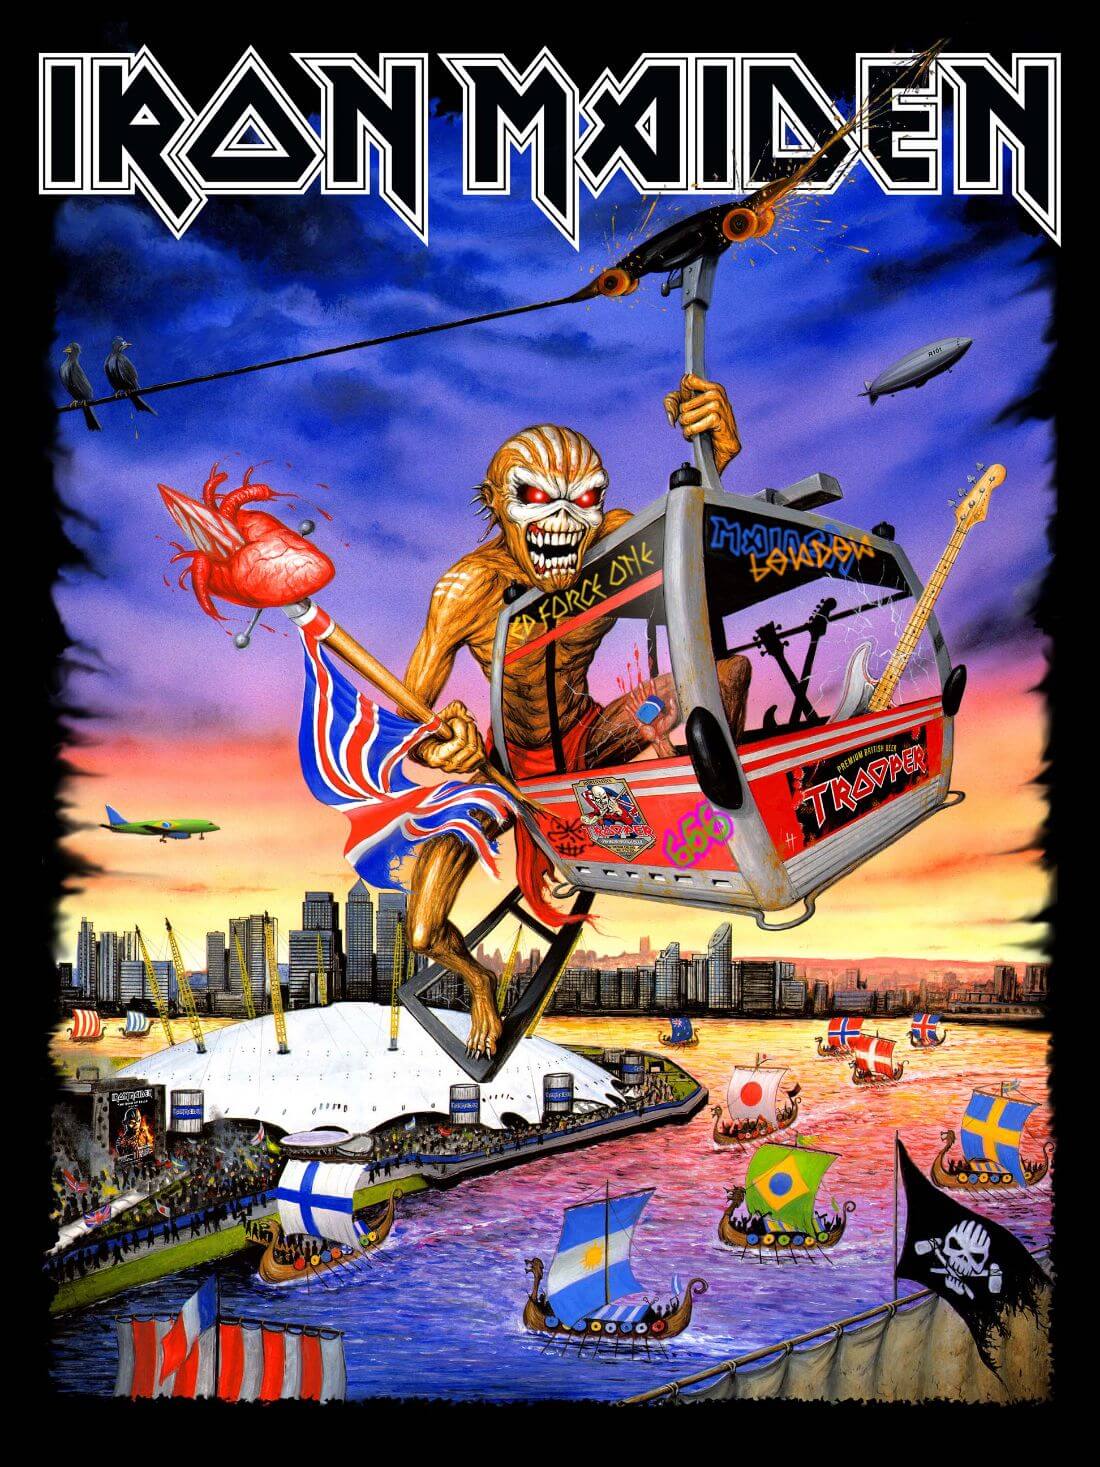 Iron Maiden Posters & Wall Art Prints